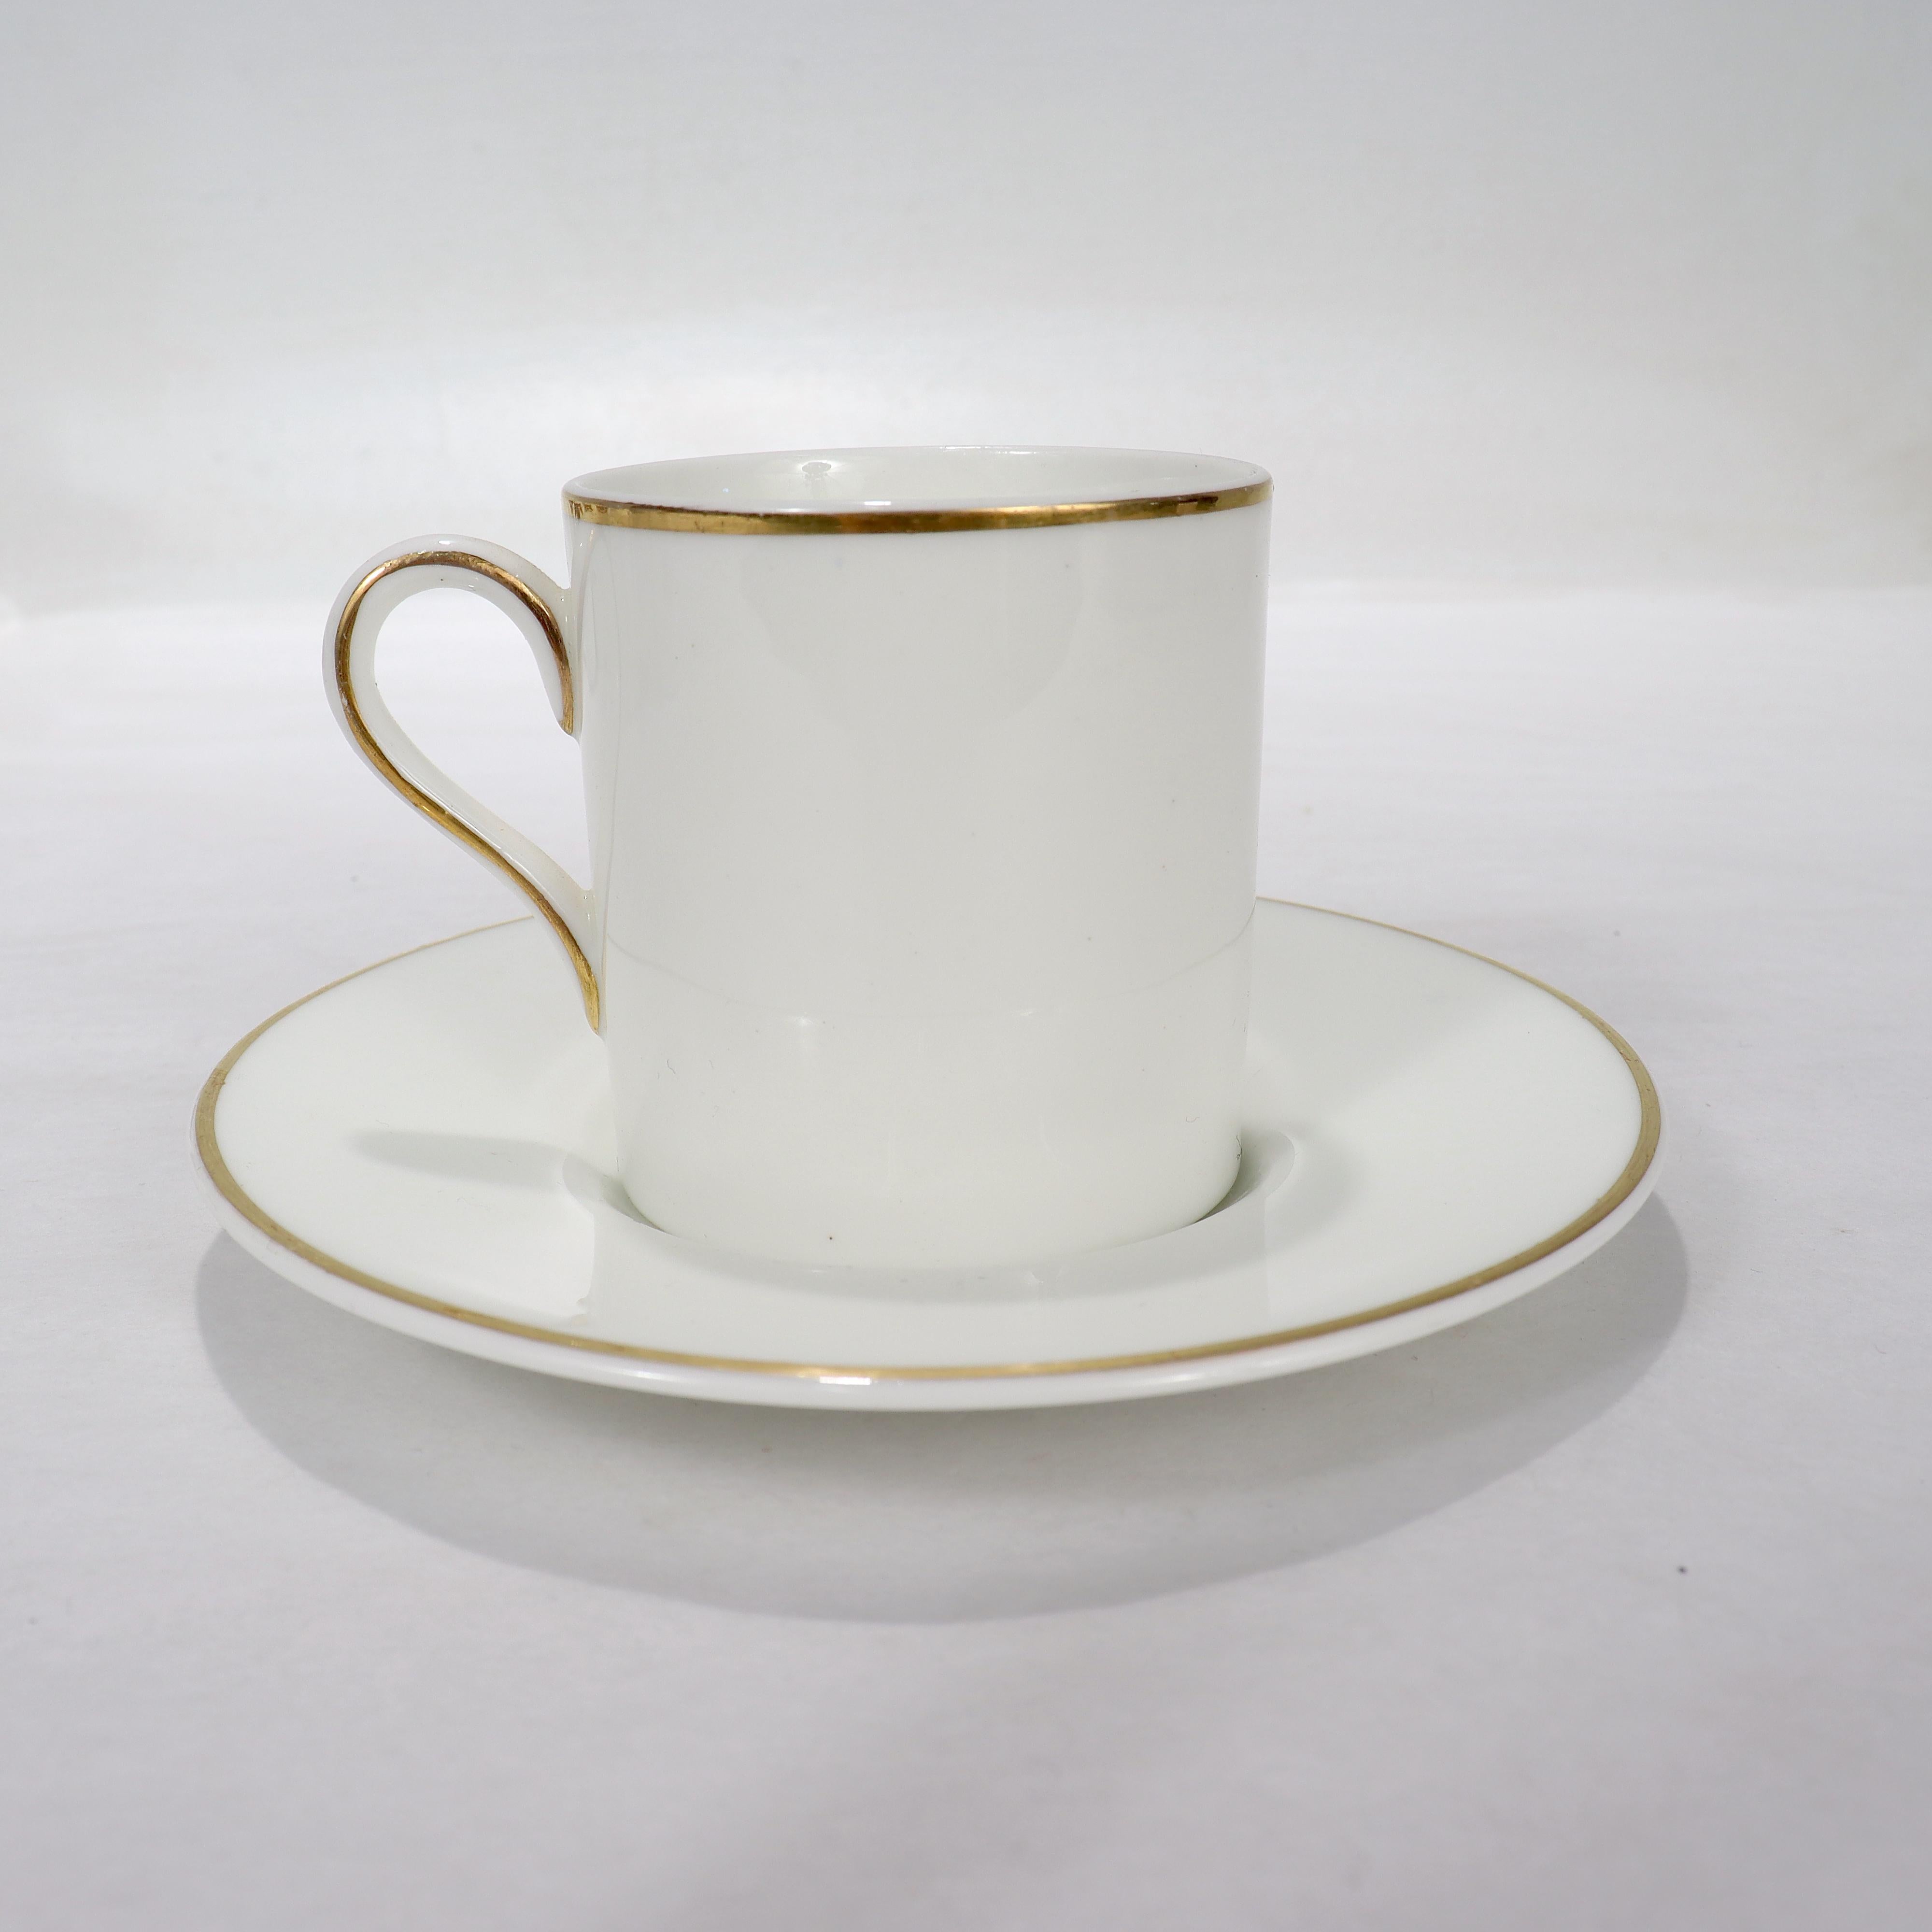 Gilt Set of 12 Crested Wedgwood Demitasse Coffee Cup & Saucers from the Brook Club 